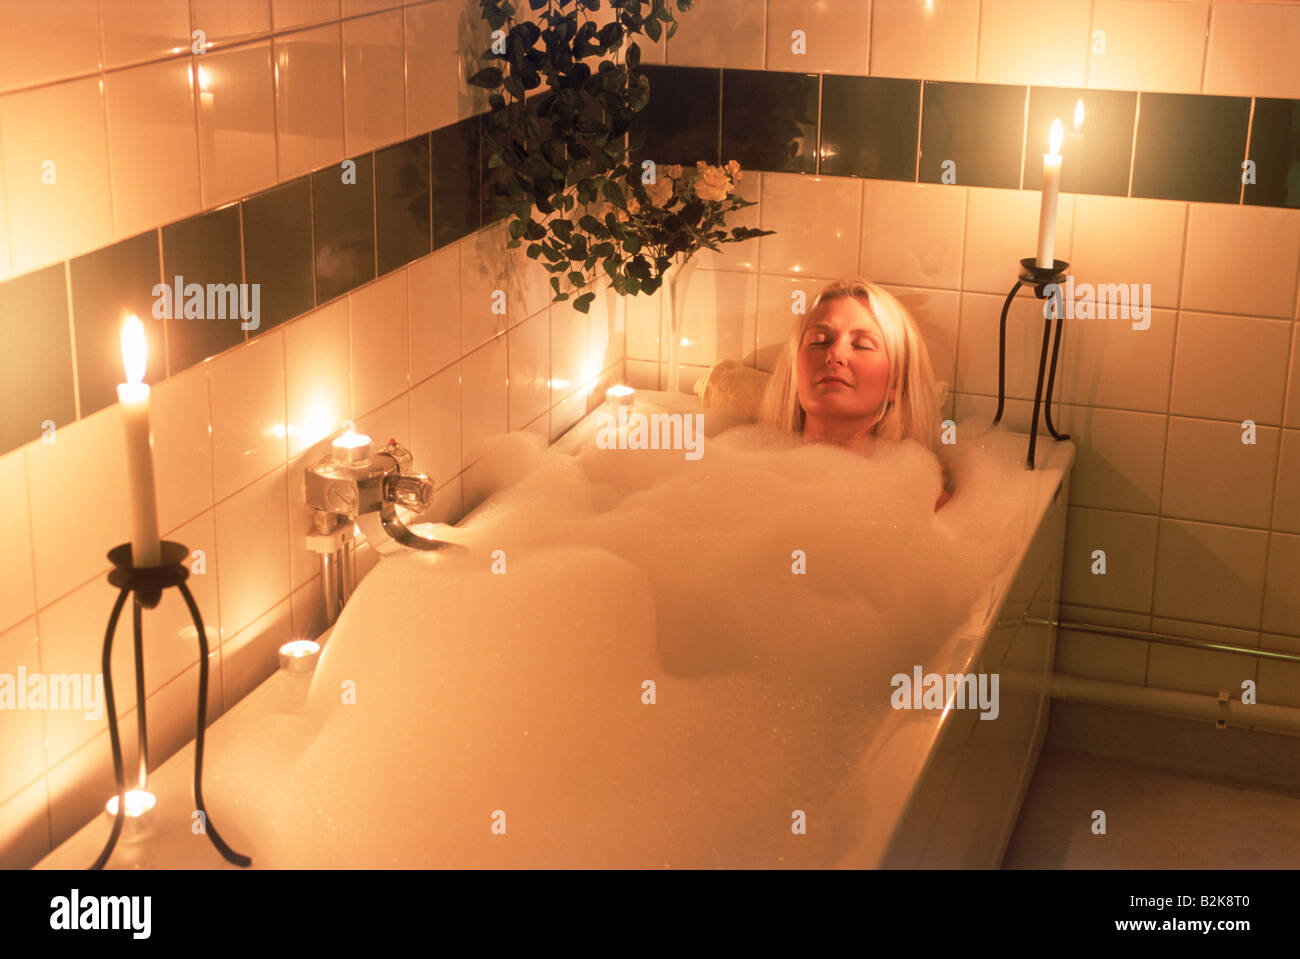 Relaxed blond woman in candle lit bubble bath Stock Photo